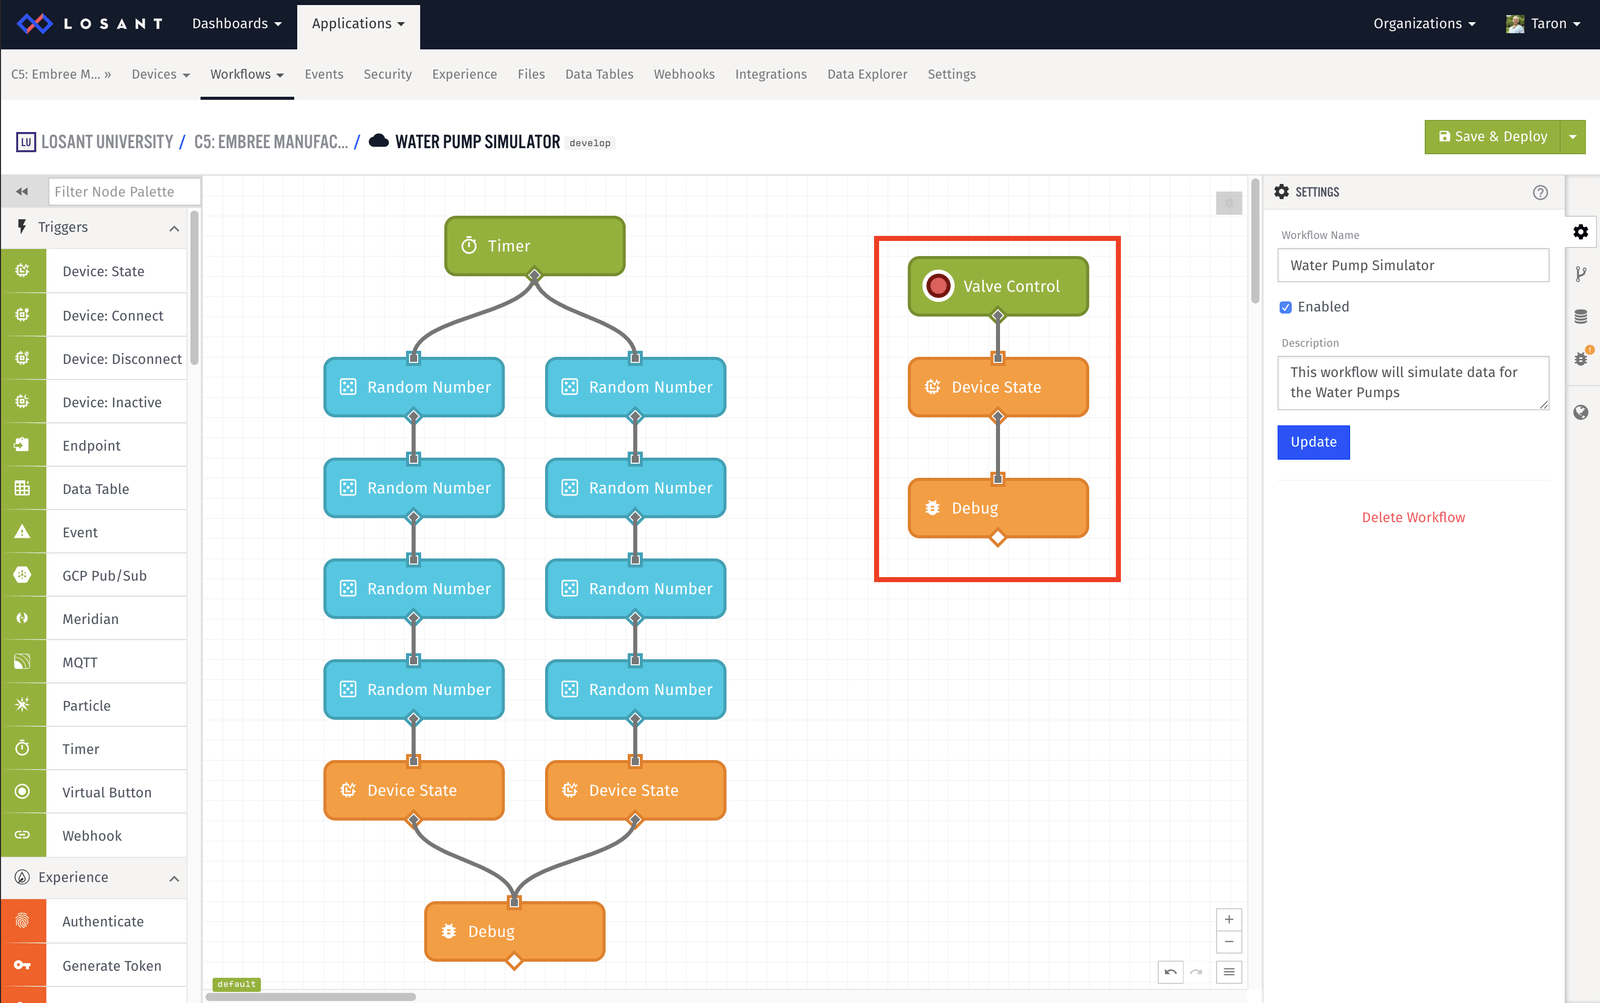 Simulated workflow new path